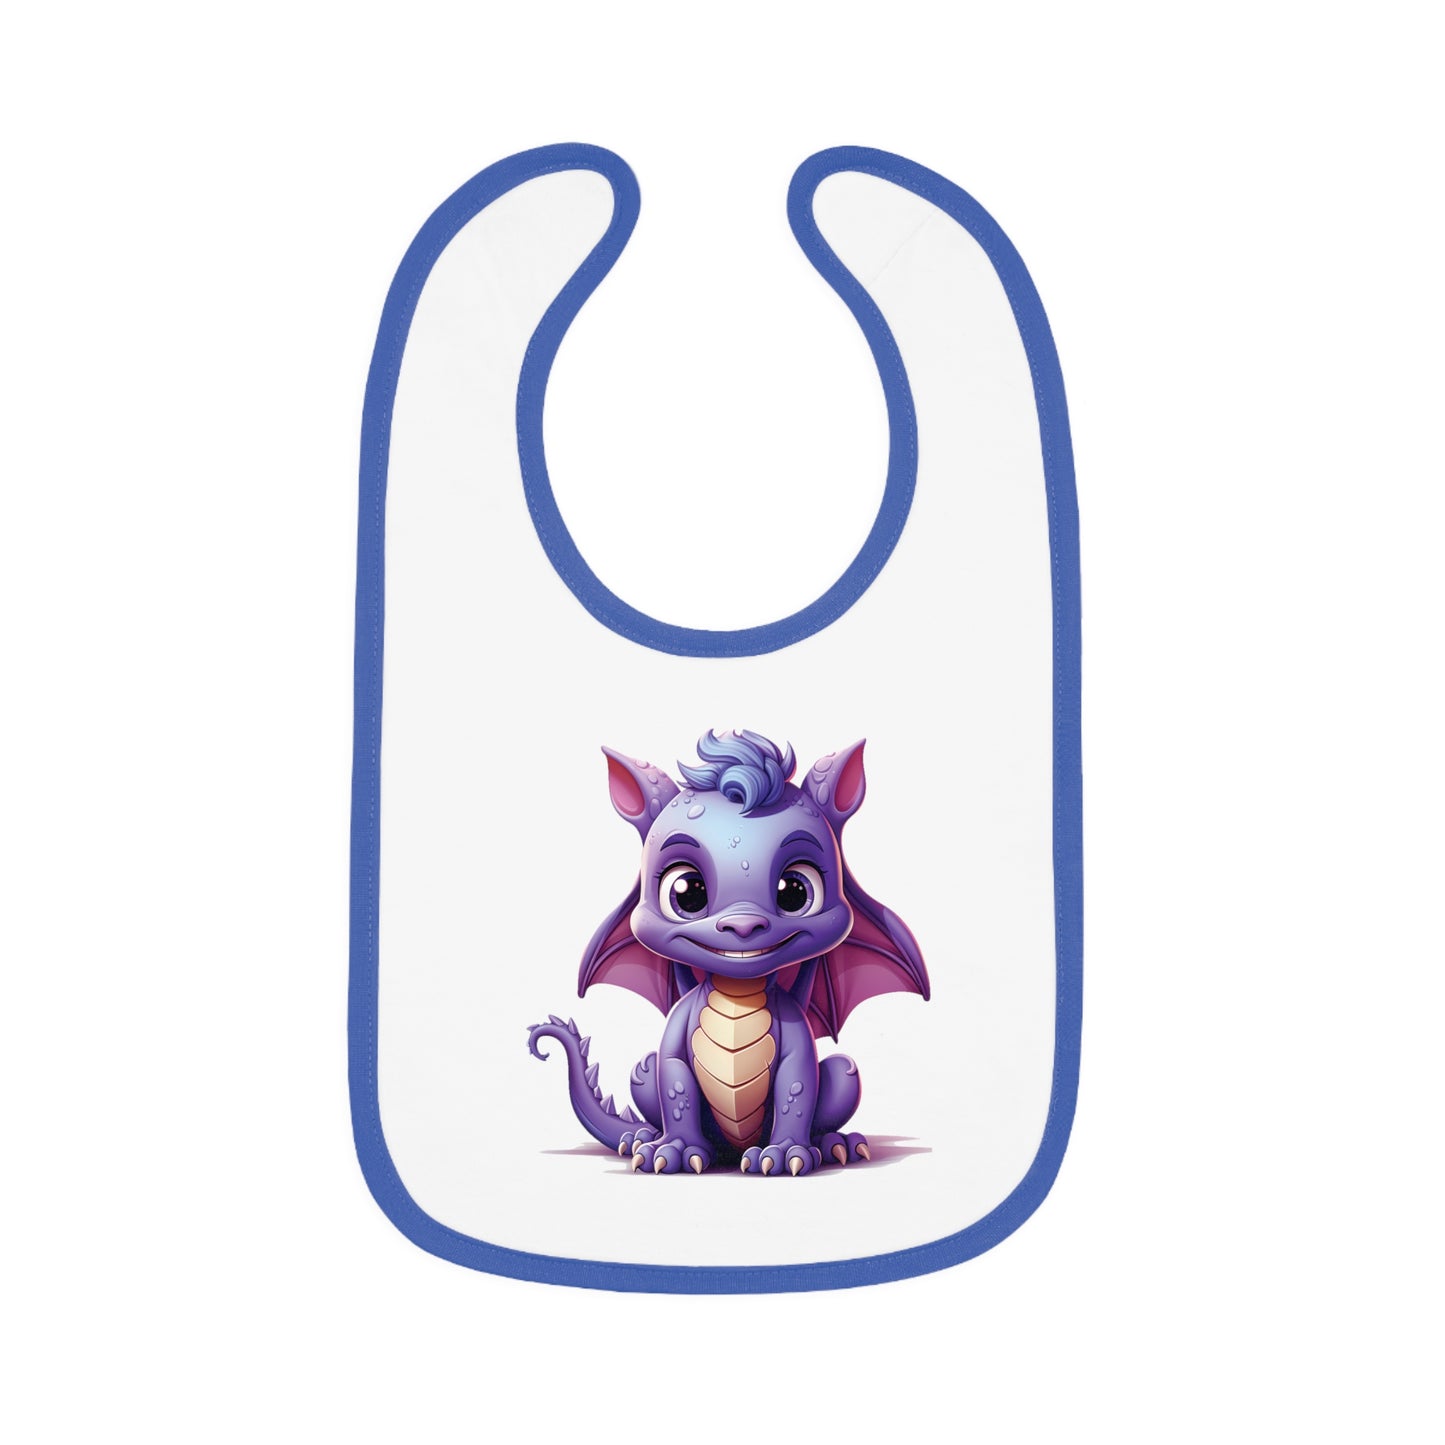 A white 100% cotton baby bib trimmed in blue - with a purple baby Happy dragon in the center - a large bib super cute.